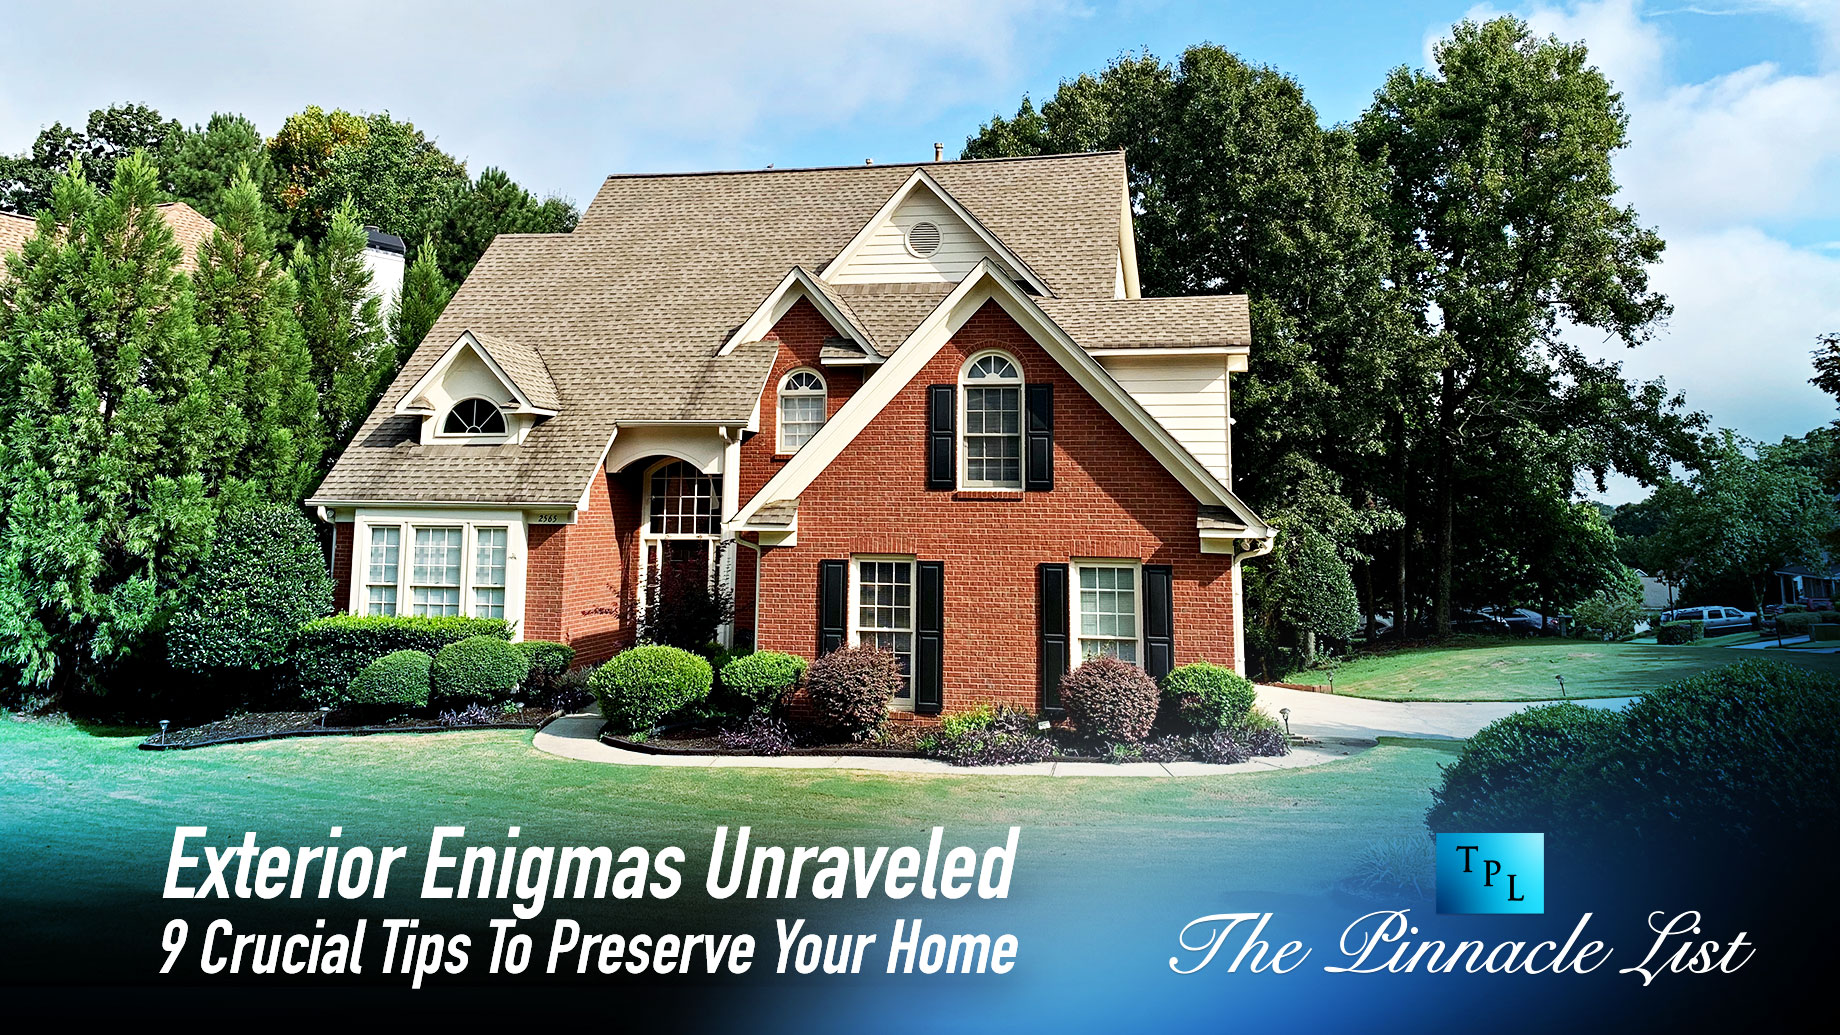 Exterior Enigmas Unraveled: 9 Crucial Tips To Preserve Your Home